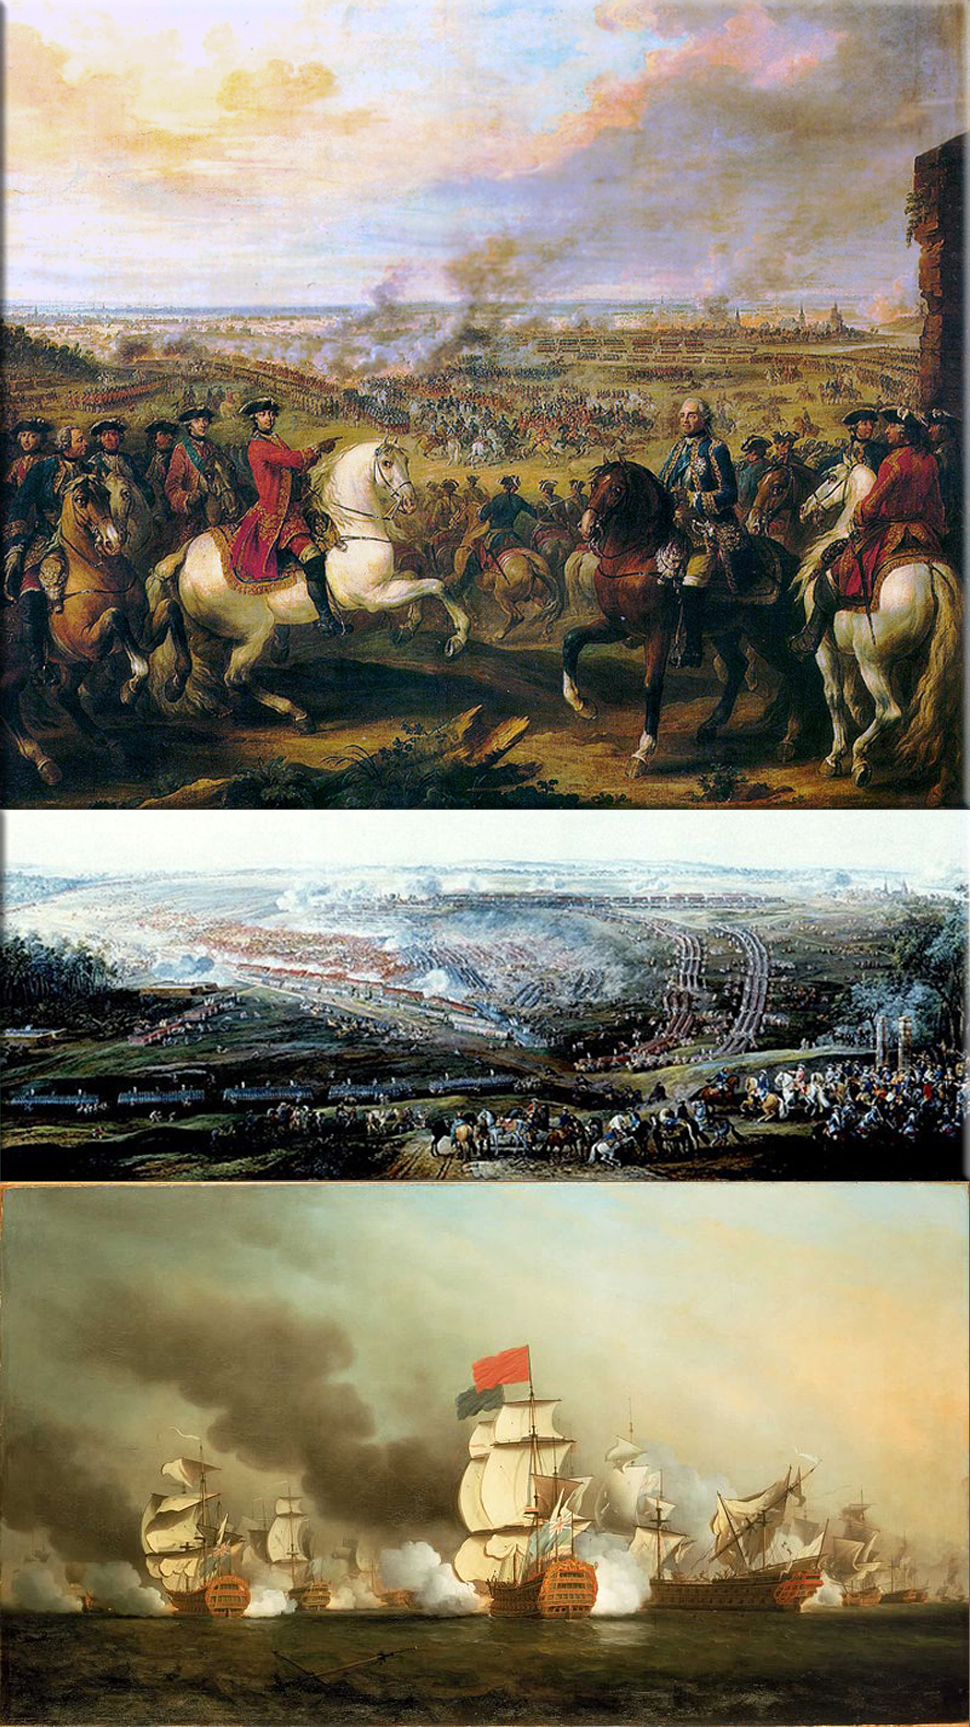 War of the Austrian Succession: (1740–48): including King George's War in North America, the War of Jenkins' Ear (which actually began formally on October 23, 1739), and two of the three Silesian wars – involved most of the powers of Europe over the question of Maria Theresa's succession to the realms of the House of Habsburg